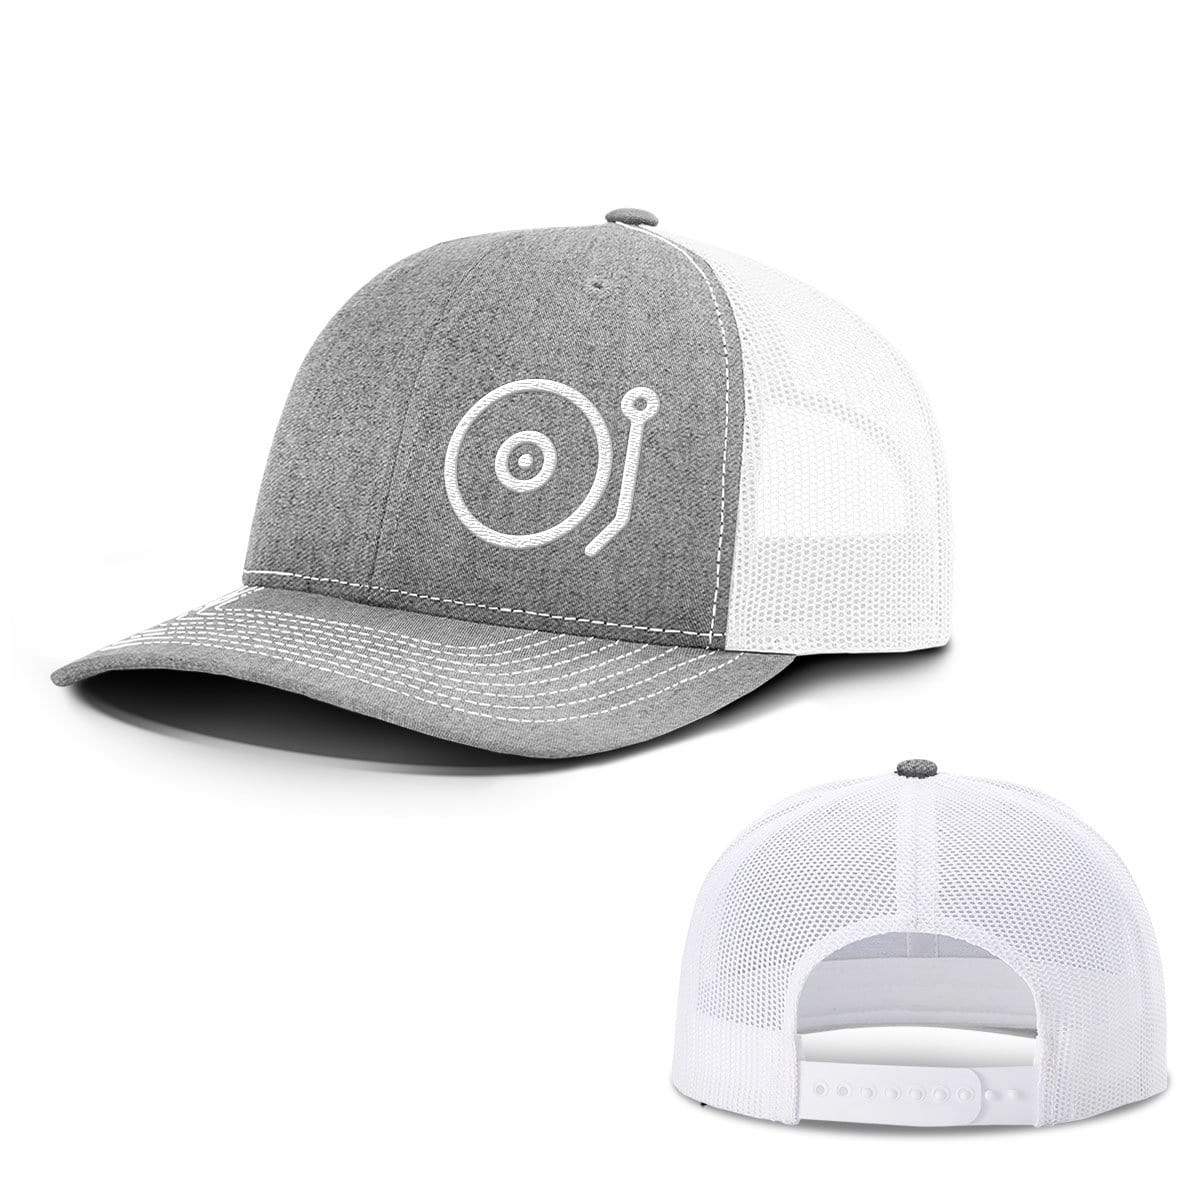 SunFrog-Busted Hats Snapback / Heather and White / One Size Turntable Music Hats